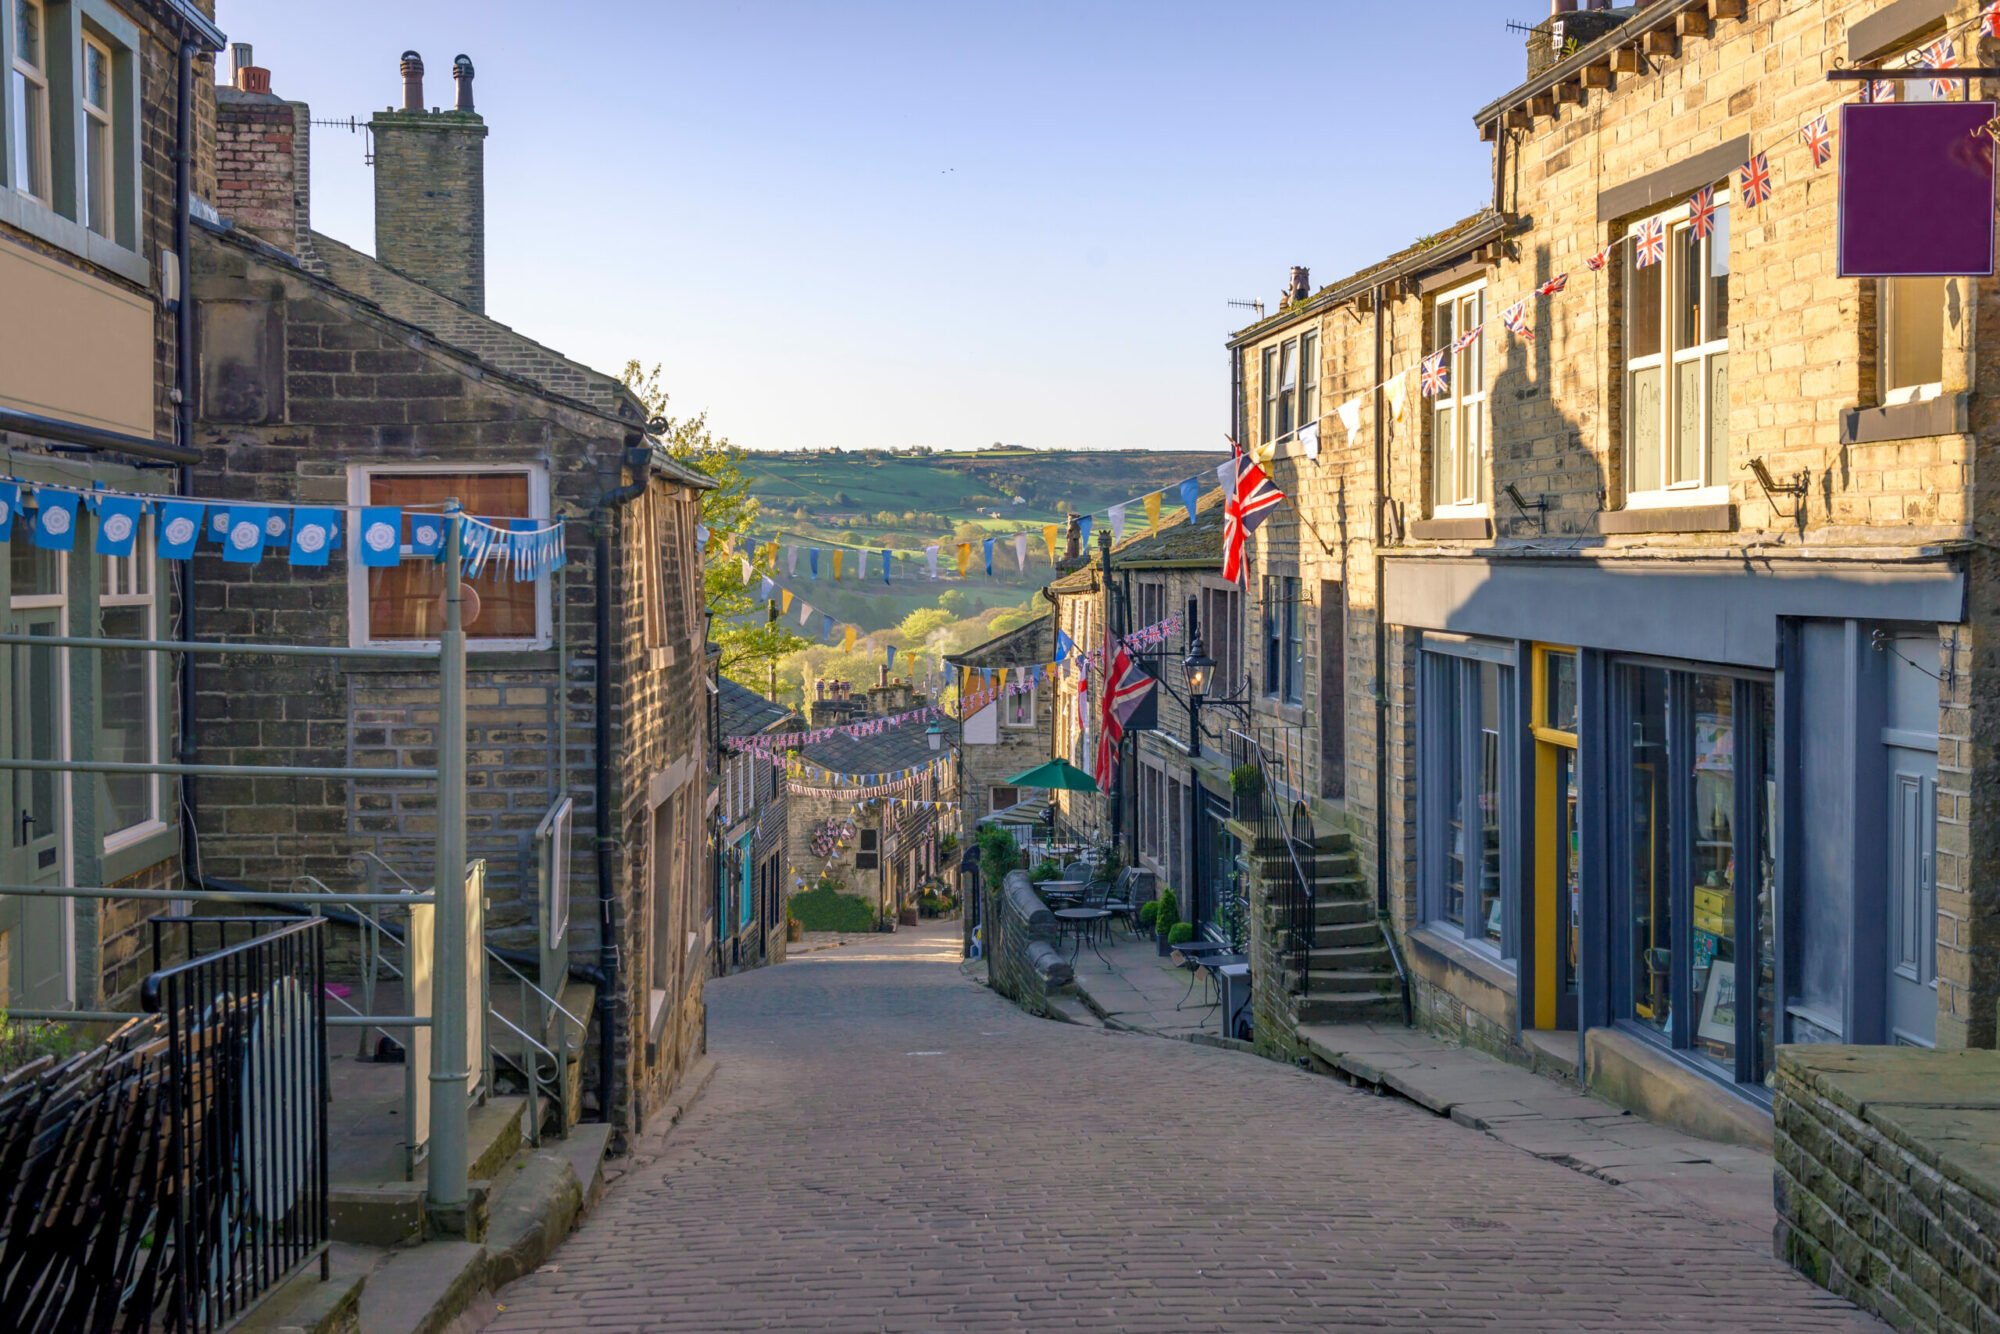 Image name Haworth scaled the 1 image from the post Haworth Village and Park in Yorkshire.com.